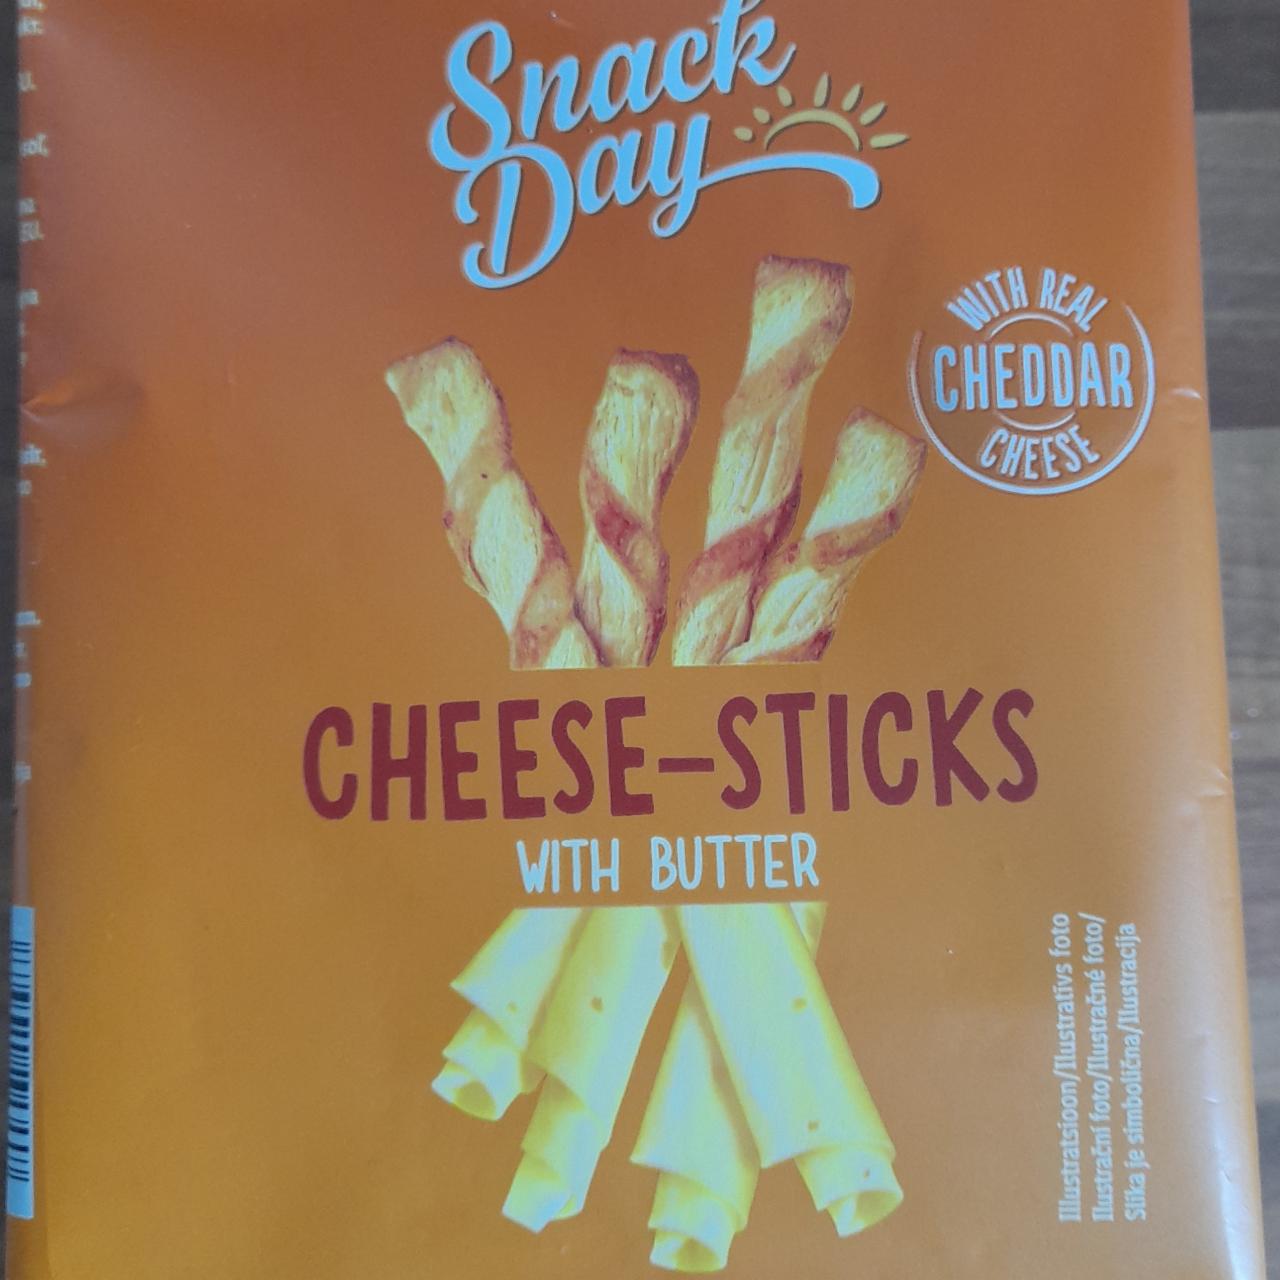 Képek - Cheese-stick with butter Snack Day